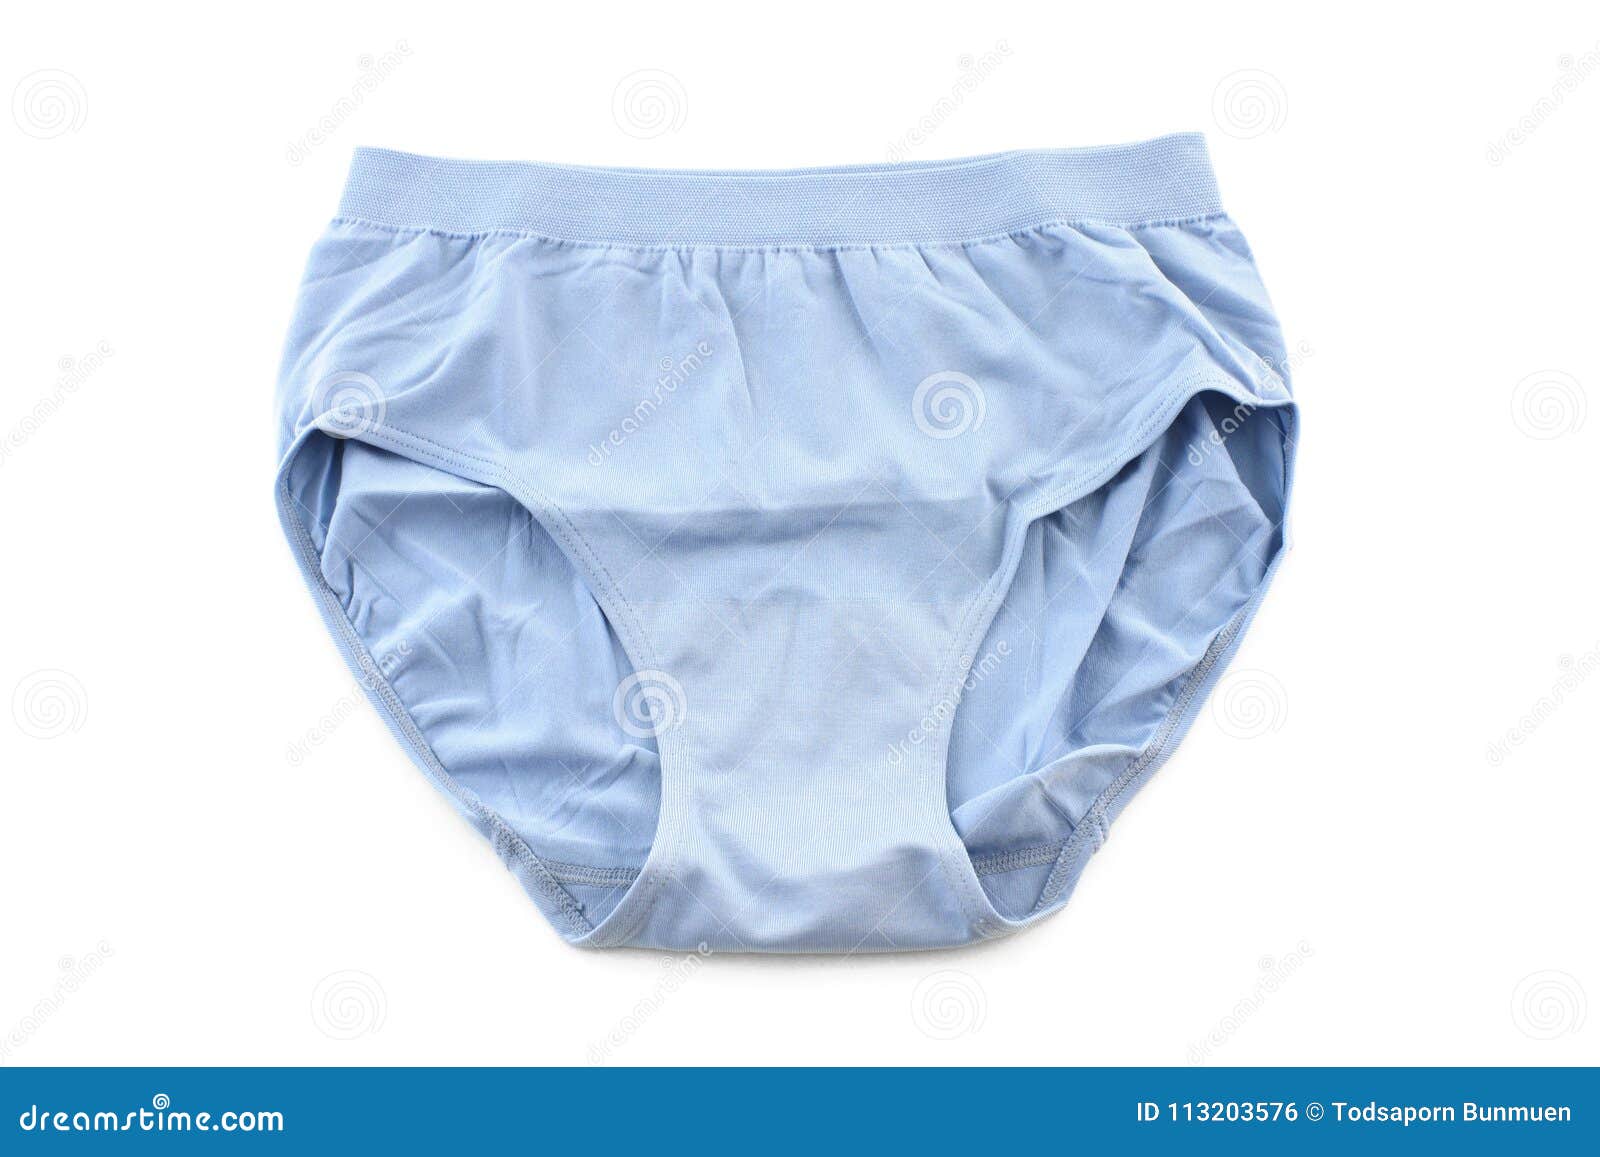 Underwear Isolated on White Background Stock Photo - Image of color ...